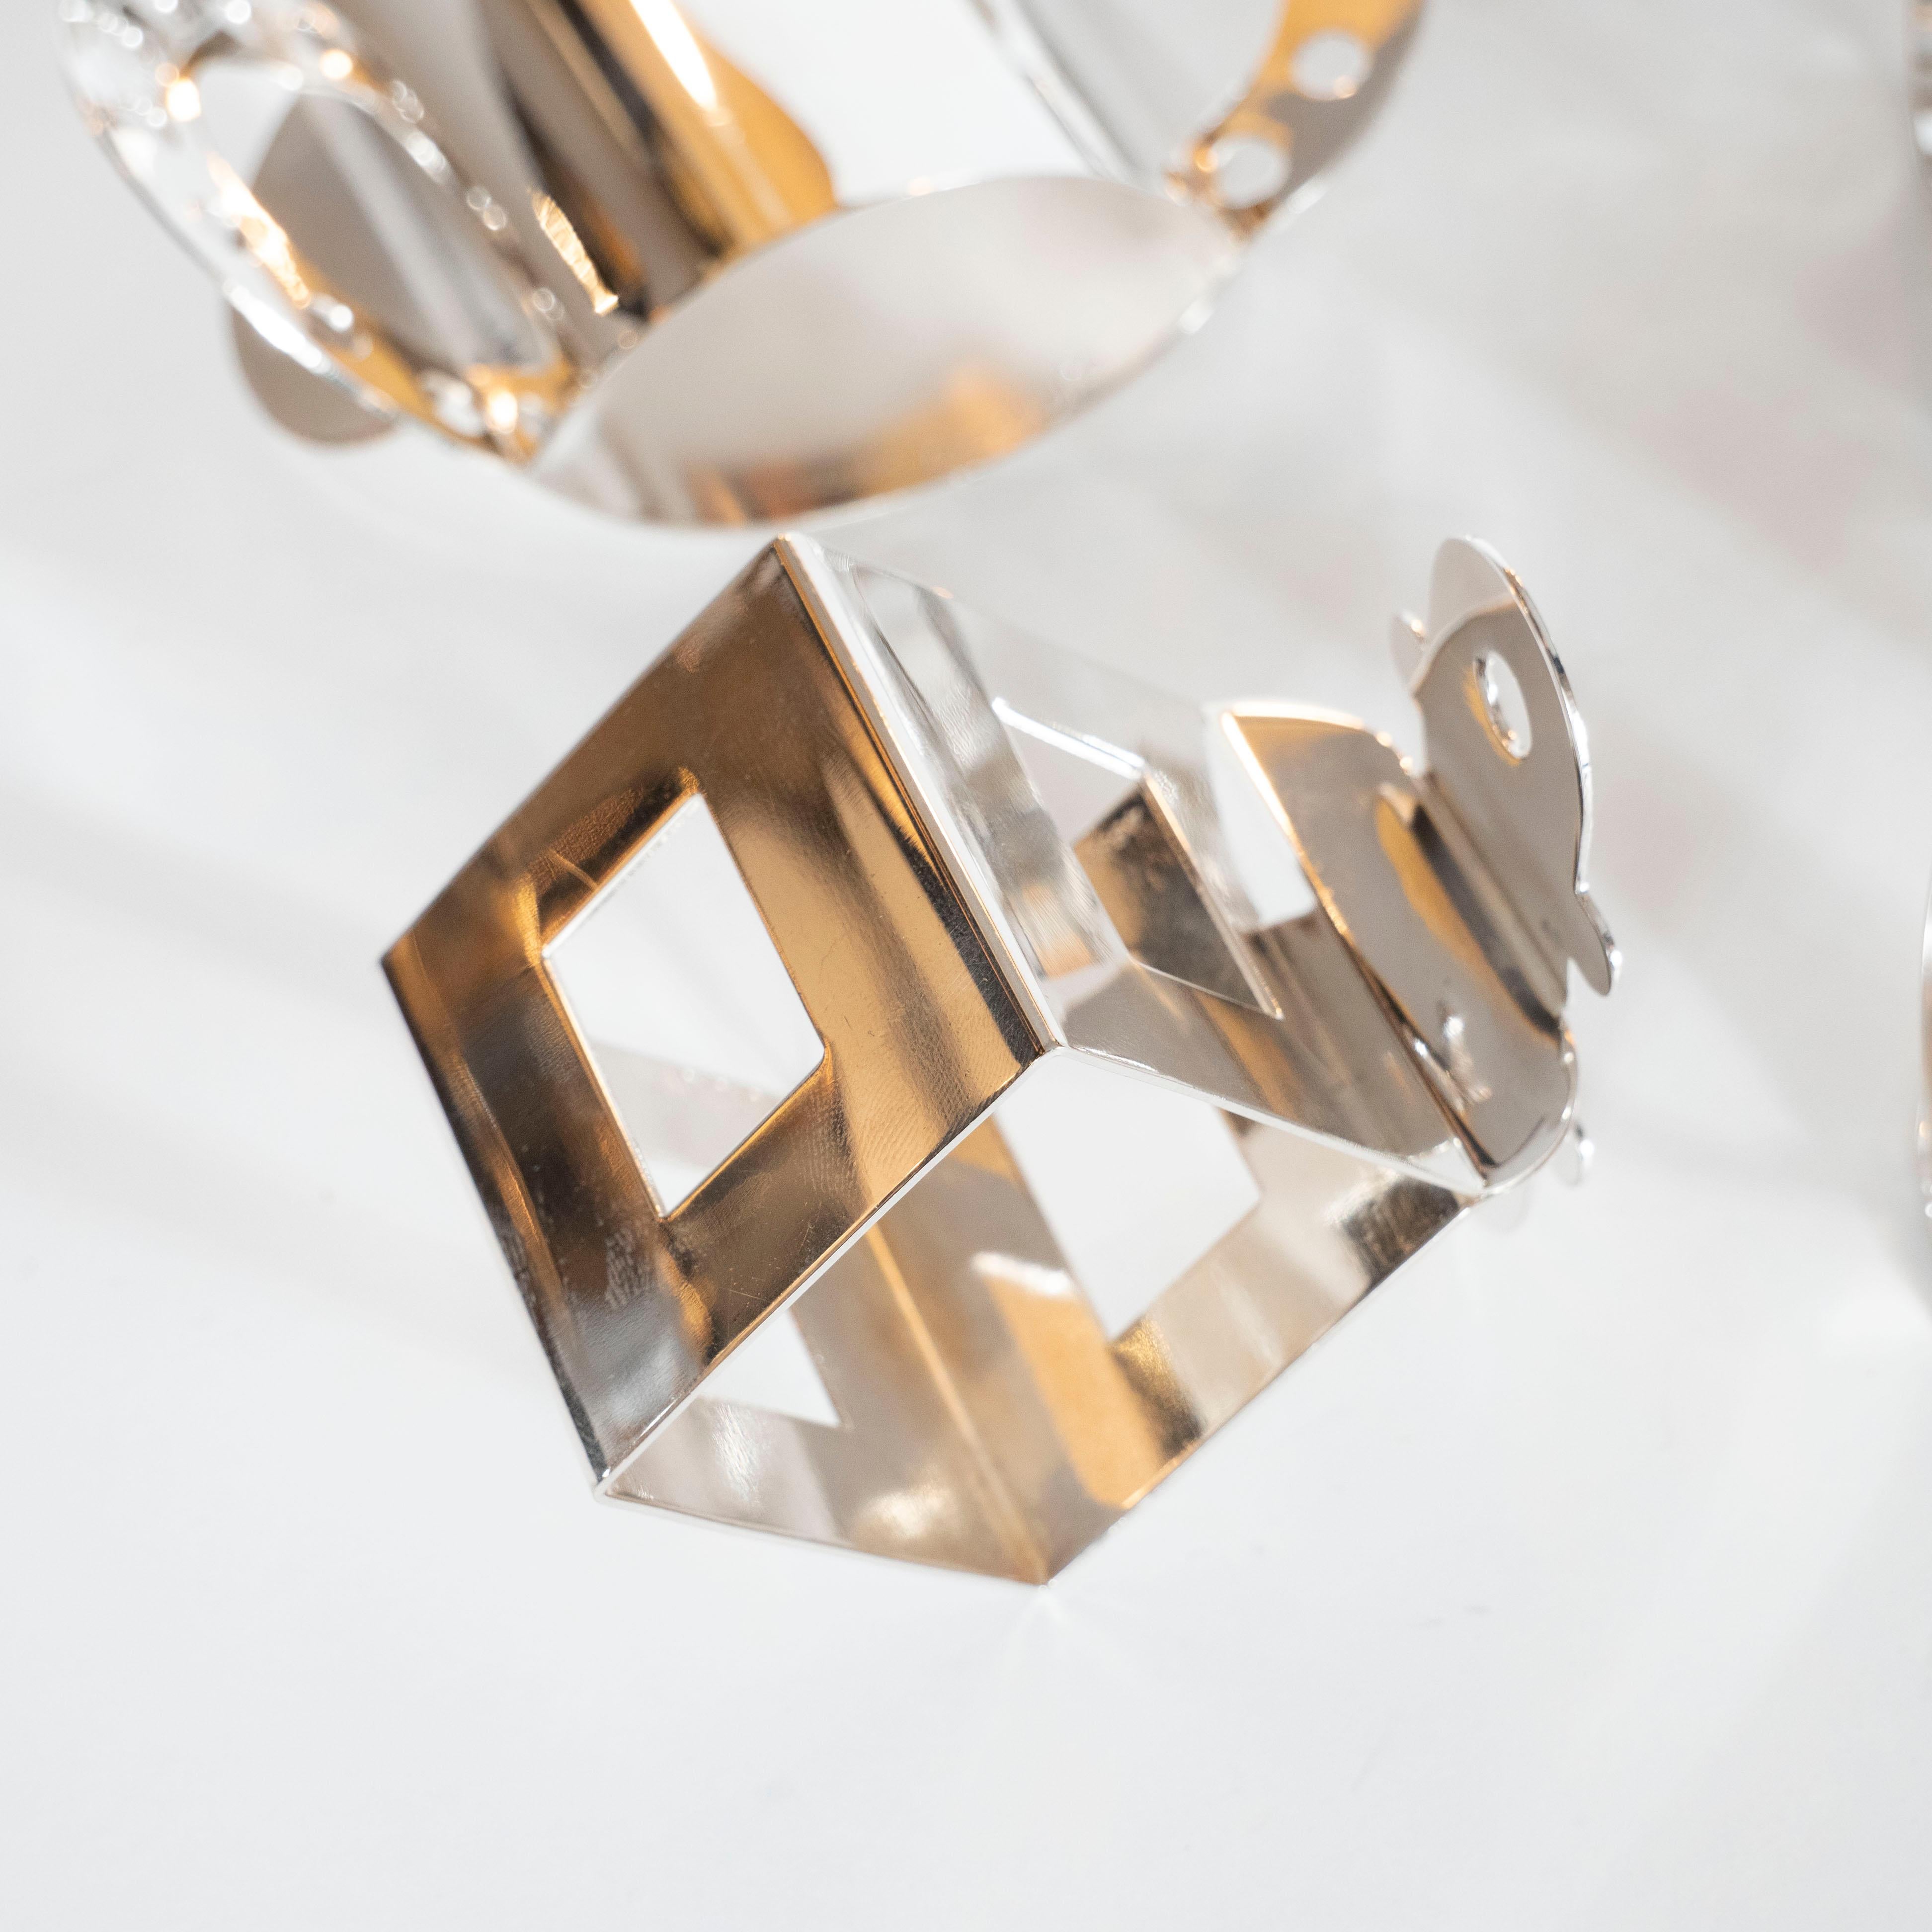 This set of 11 silver plate napkin rings was designed by Nathalie du Pasquier for Bodum, circa 1980. Pasquier, an influential Milan-based artist and founding member of the Memphis Group, is best known for her Postmodern textiles, furniture, and